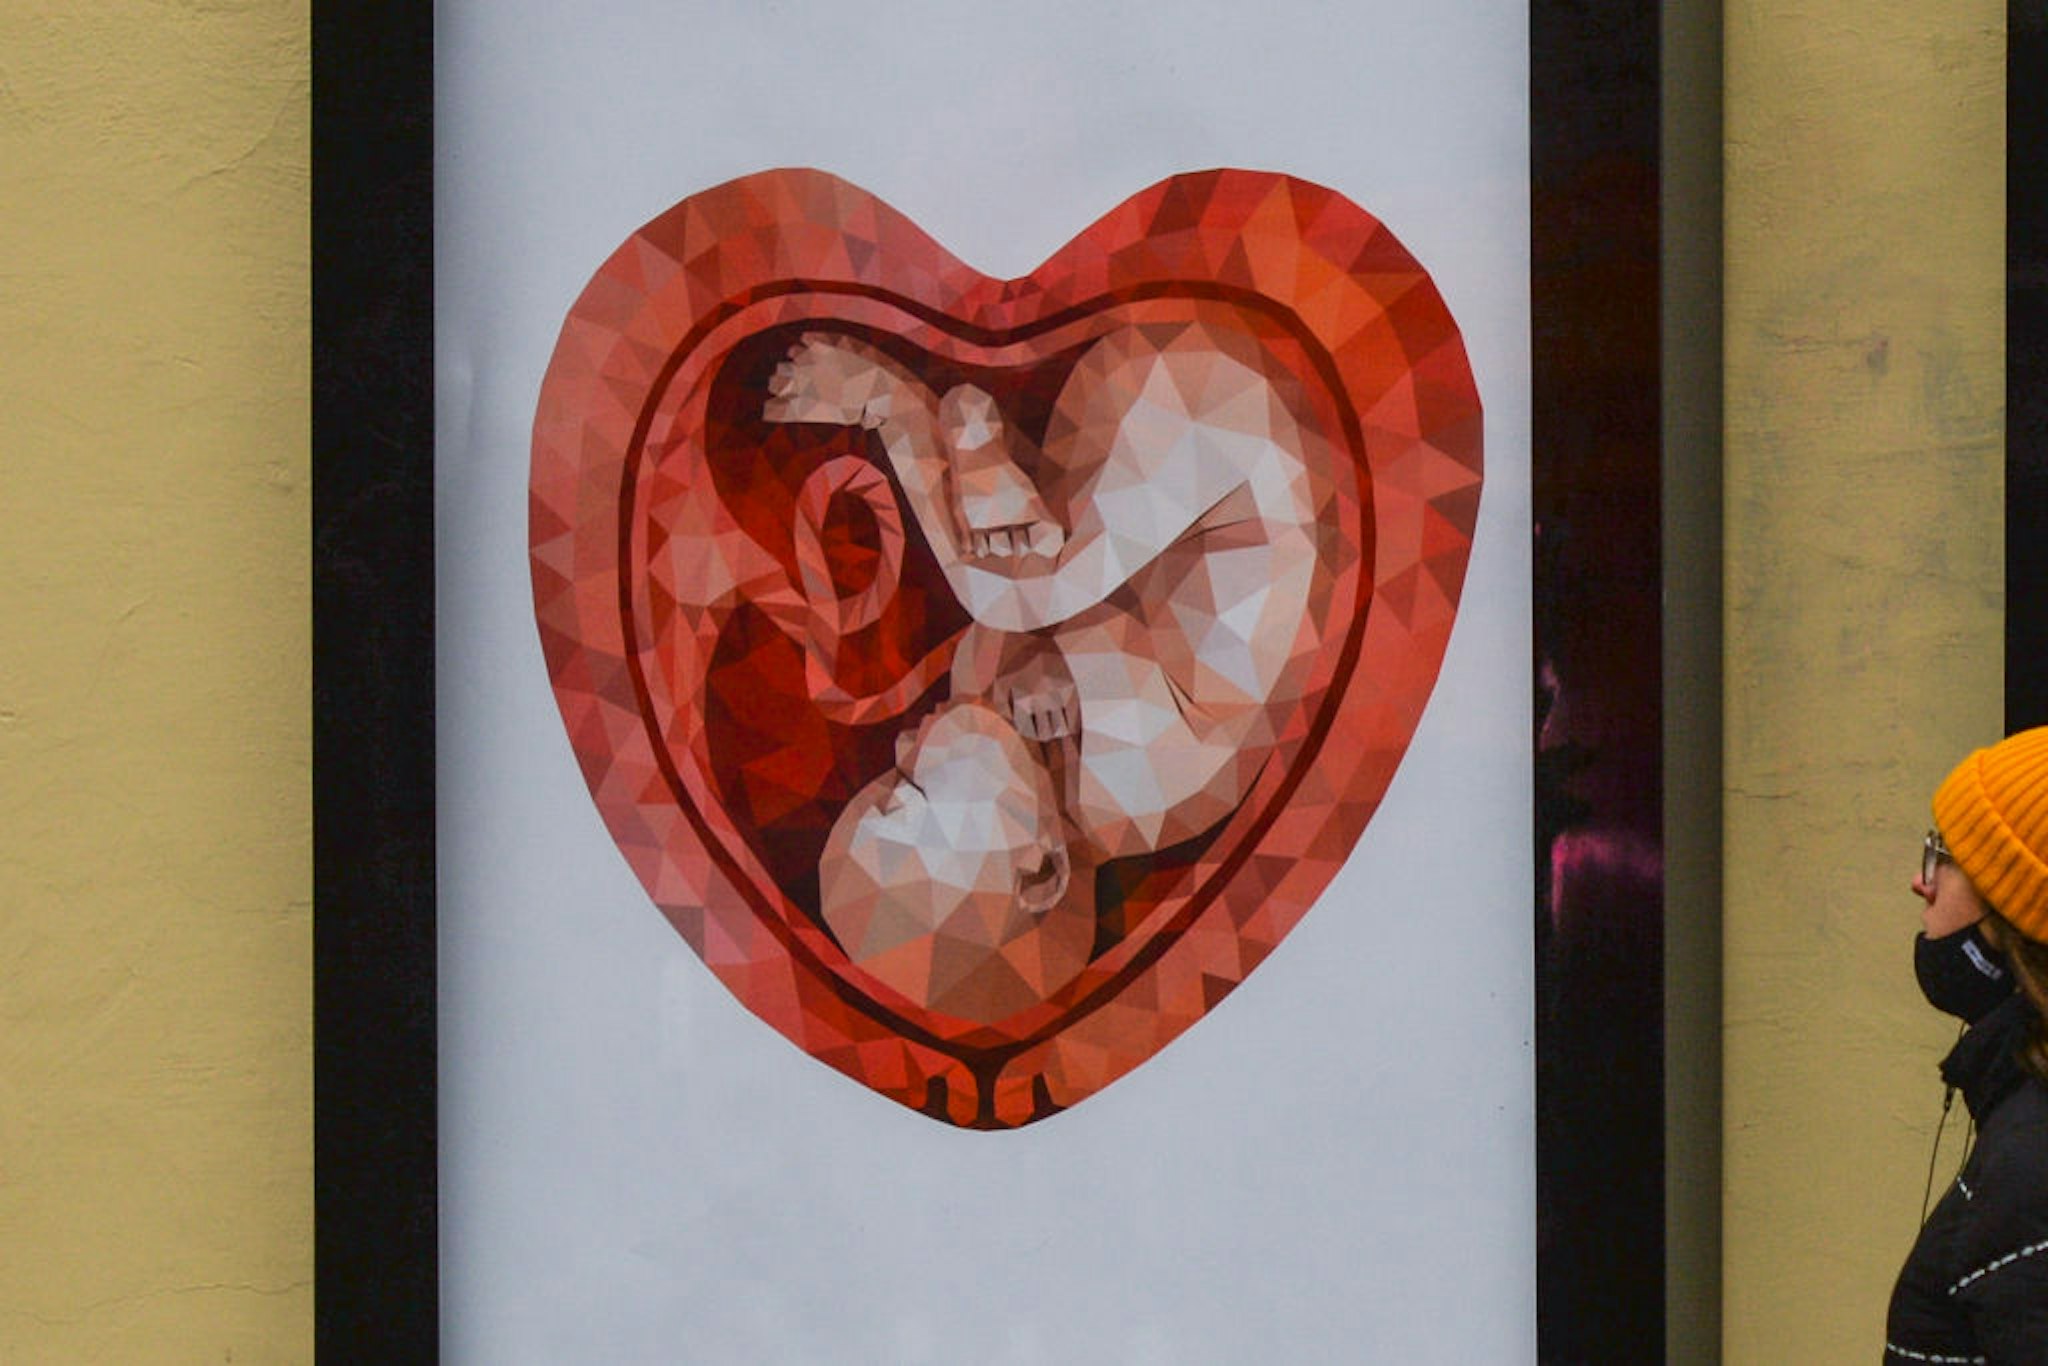 A lady passes next to a vandalised billboard with an image of a fetus inside a heart shaped womb, by Ekaterina Glazkova, seen in Krakow (photo taken on December 9, 2020 in Krakow). 30-year-old independent artist Ekaterina Glazkova from St. Petersburg unexpectedly became famous in Poland thanks to the Foundation 'Our Children - Education, Health, Faith' from Kornice in Silesia. The drawing of a Russian woman - a child in the womb - appearing on billboards and posters in various Polish cities has become a symbol of the anti-abortion movement. However, as per the artist's statement on Instagram on December 11, the intended purpose of the illustration was not related to the Pro-Life movement: 'This illustration was painted as something positive, as the personification of the joy of motherhood, but definitely not a symbol of the oppression of women's human rights. I've been selling this picture on microstocks for many years now, and in theory anyone can buy it and use it. But Ive never thought that everything could turn out like this. As for myself, I can say that, as a woman and as an artist, I fully support Polish women in their struggle for their right to make choices'. On Wednesday, December 16, 2020, in Dublin, Ireland. (Photo by Artur Widak/NurPhoto via Getty Images)